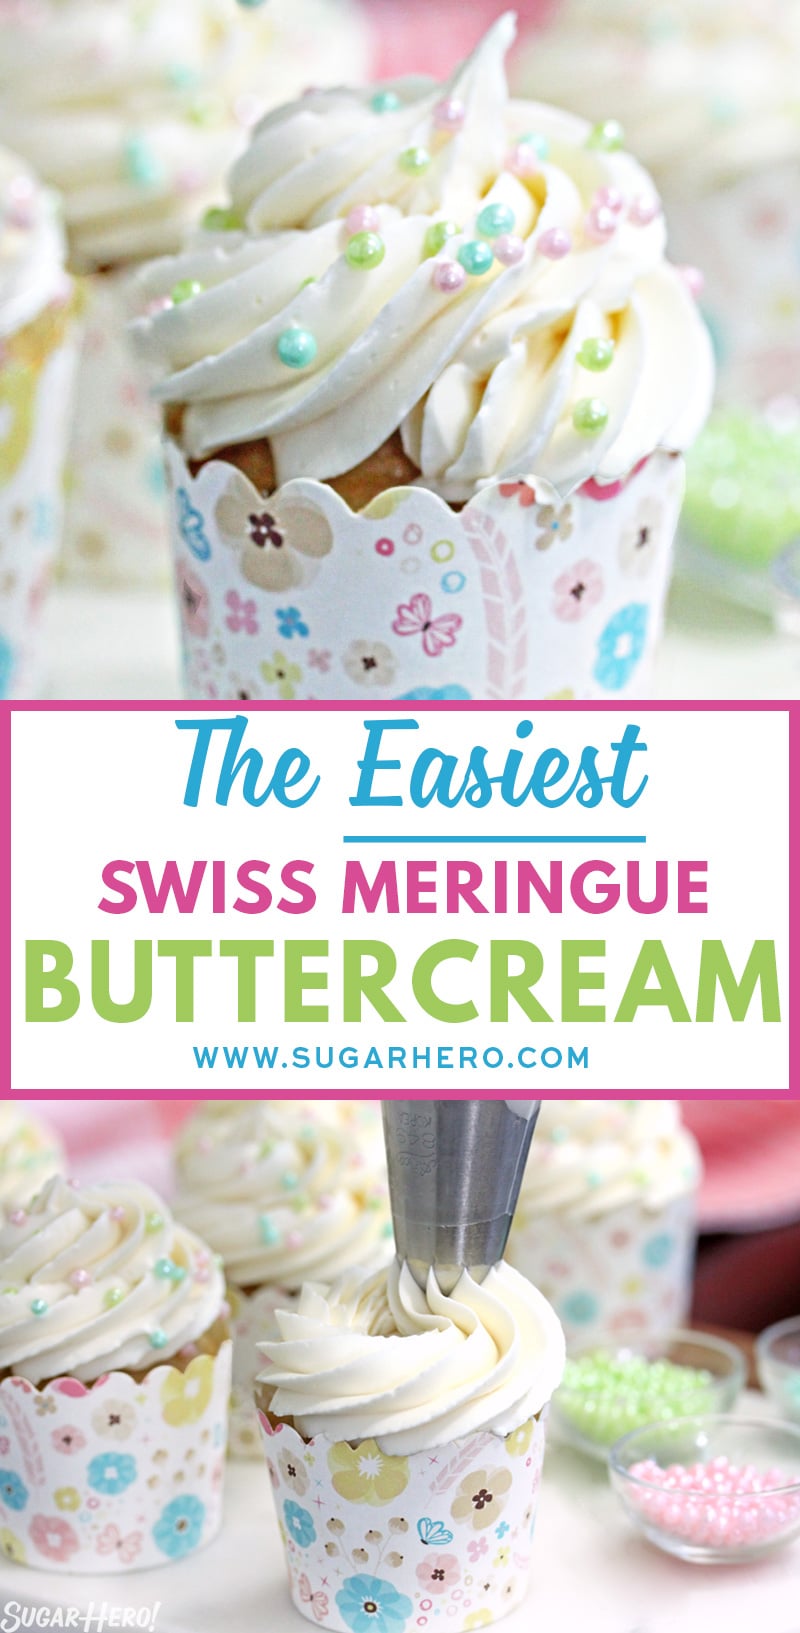 2 photos of the EASIEST Swiss Meringue Buttercream Recipe with text overlay for Pinterest.